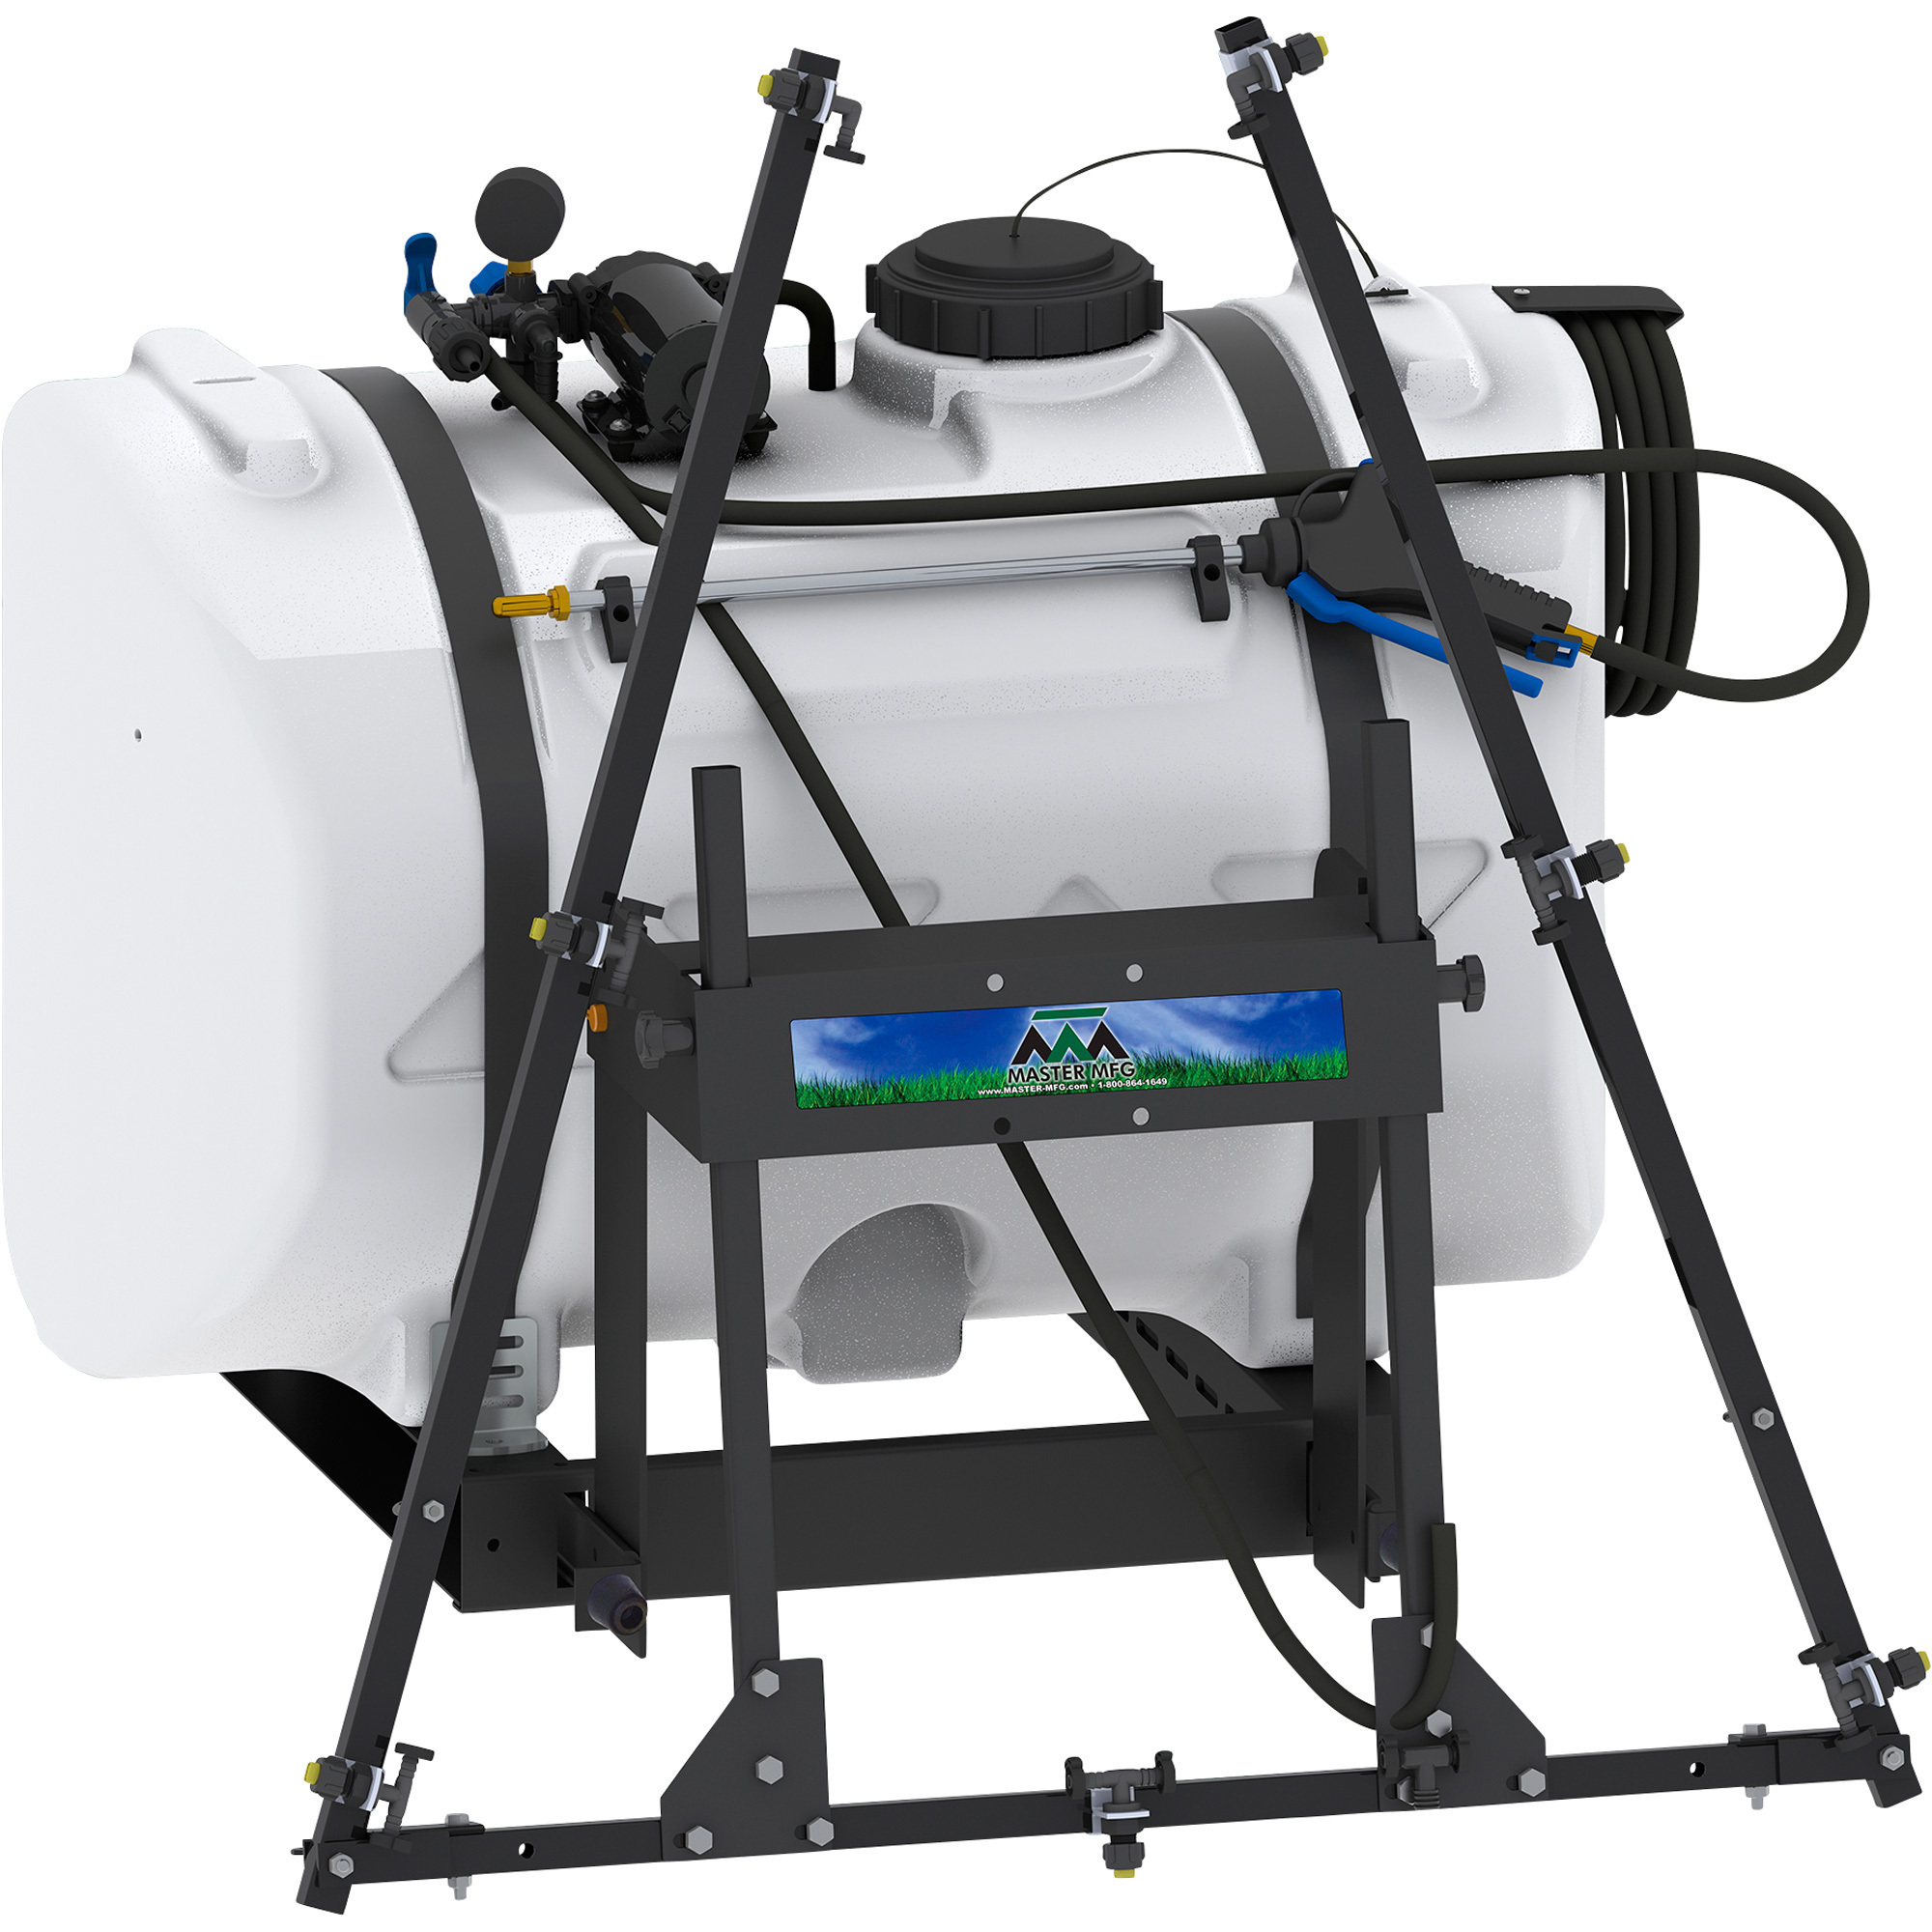 Master MFG Over-the-Tailgate Spot and Broadcast Sprayer, 60-Gallon Capacity, 2.2 GPM, Model UTO-I1-060D-MM